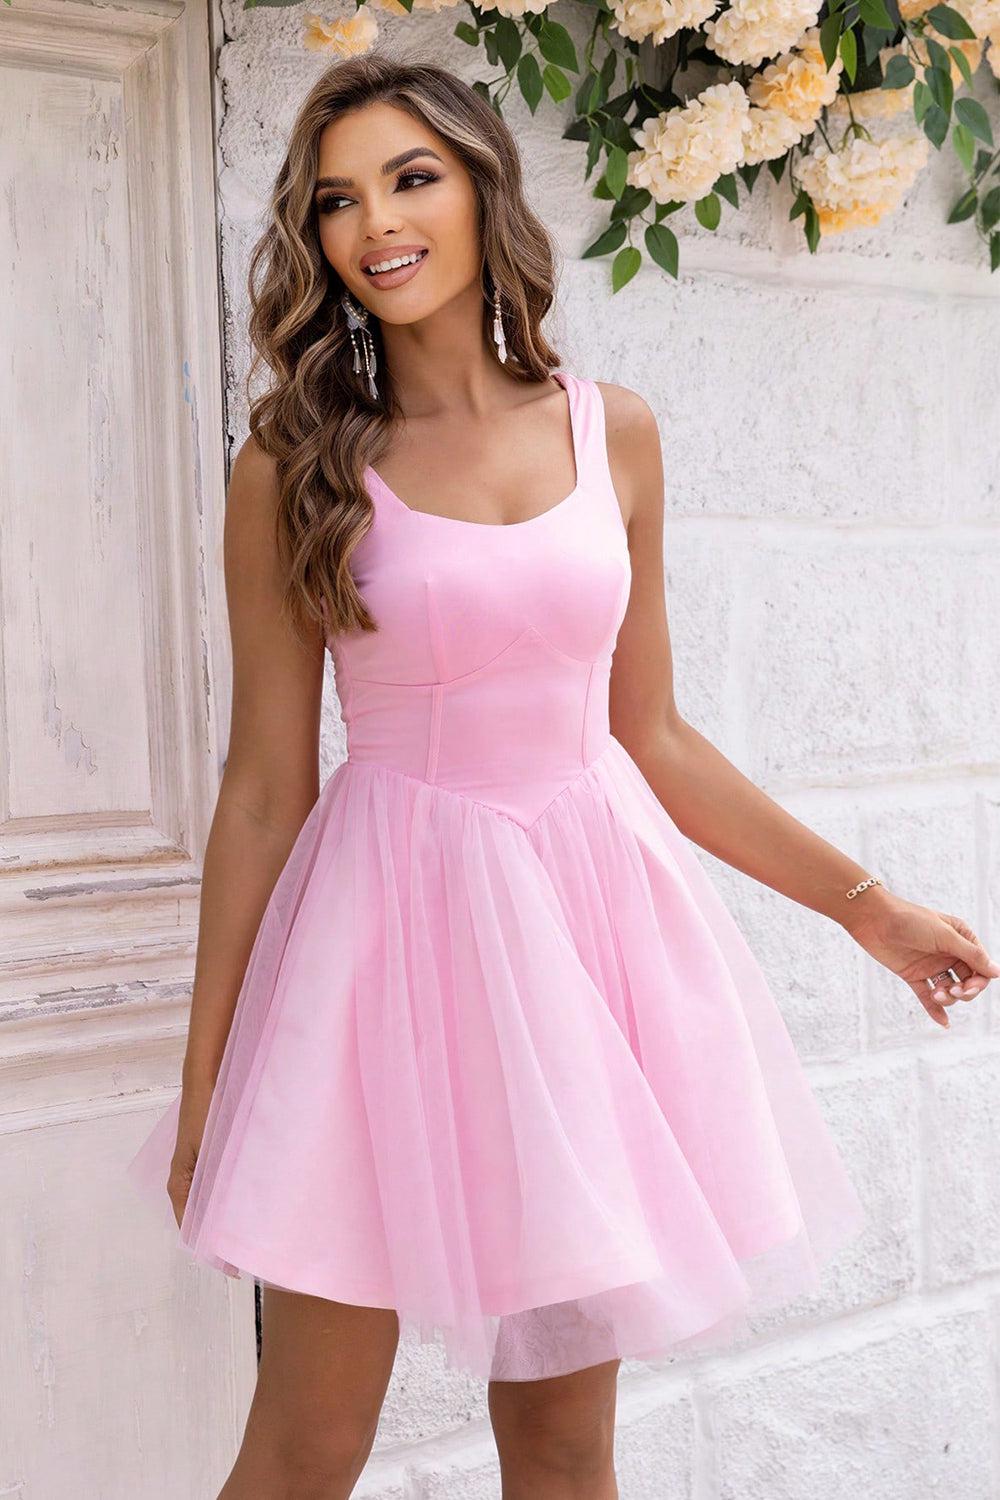 a woman in a pink dress posing for a picture